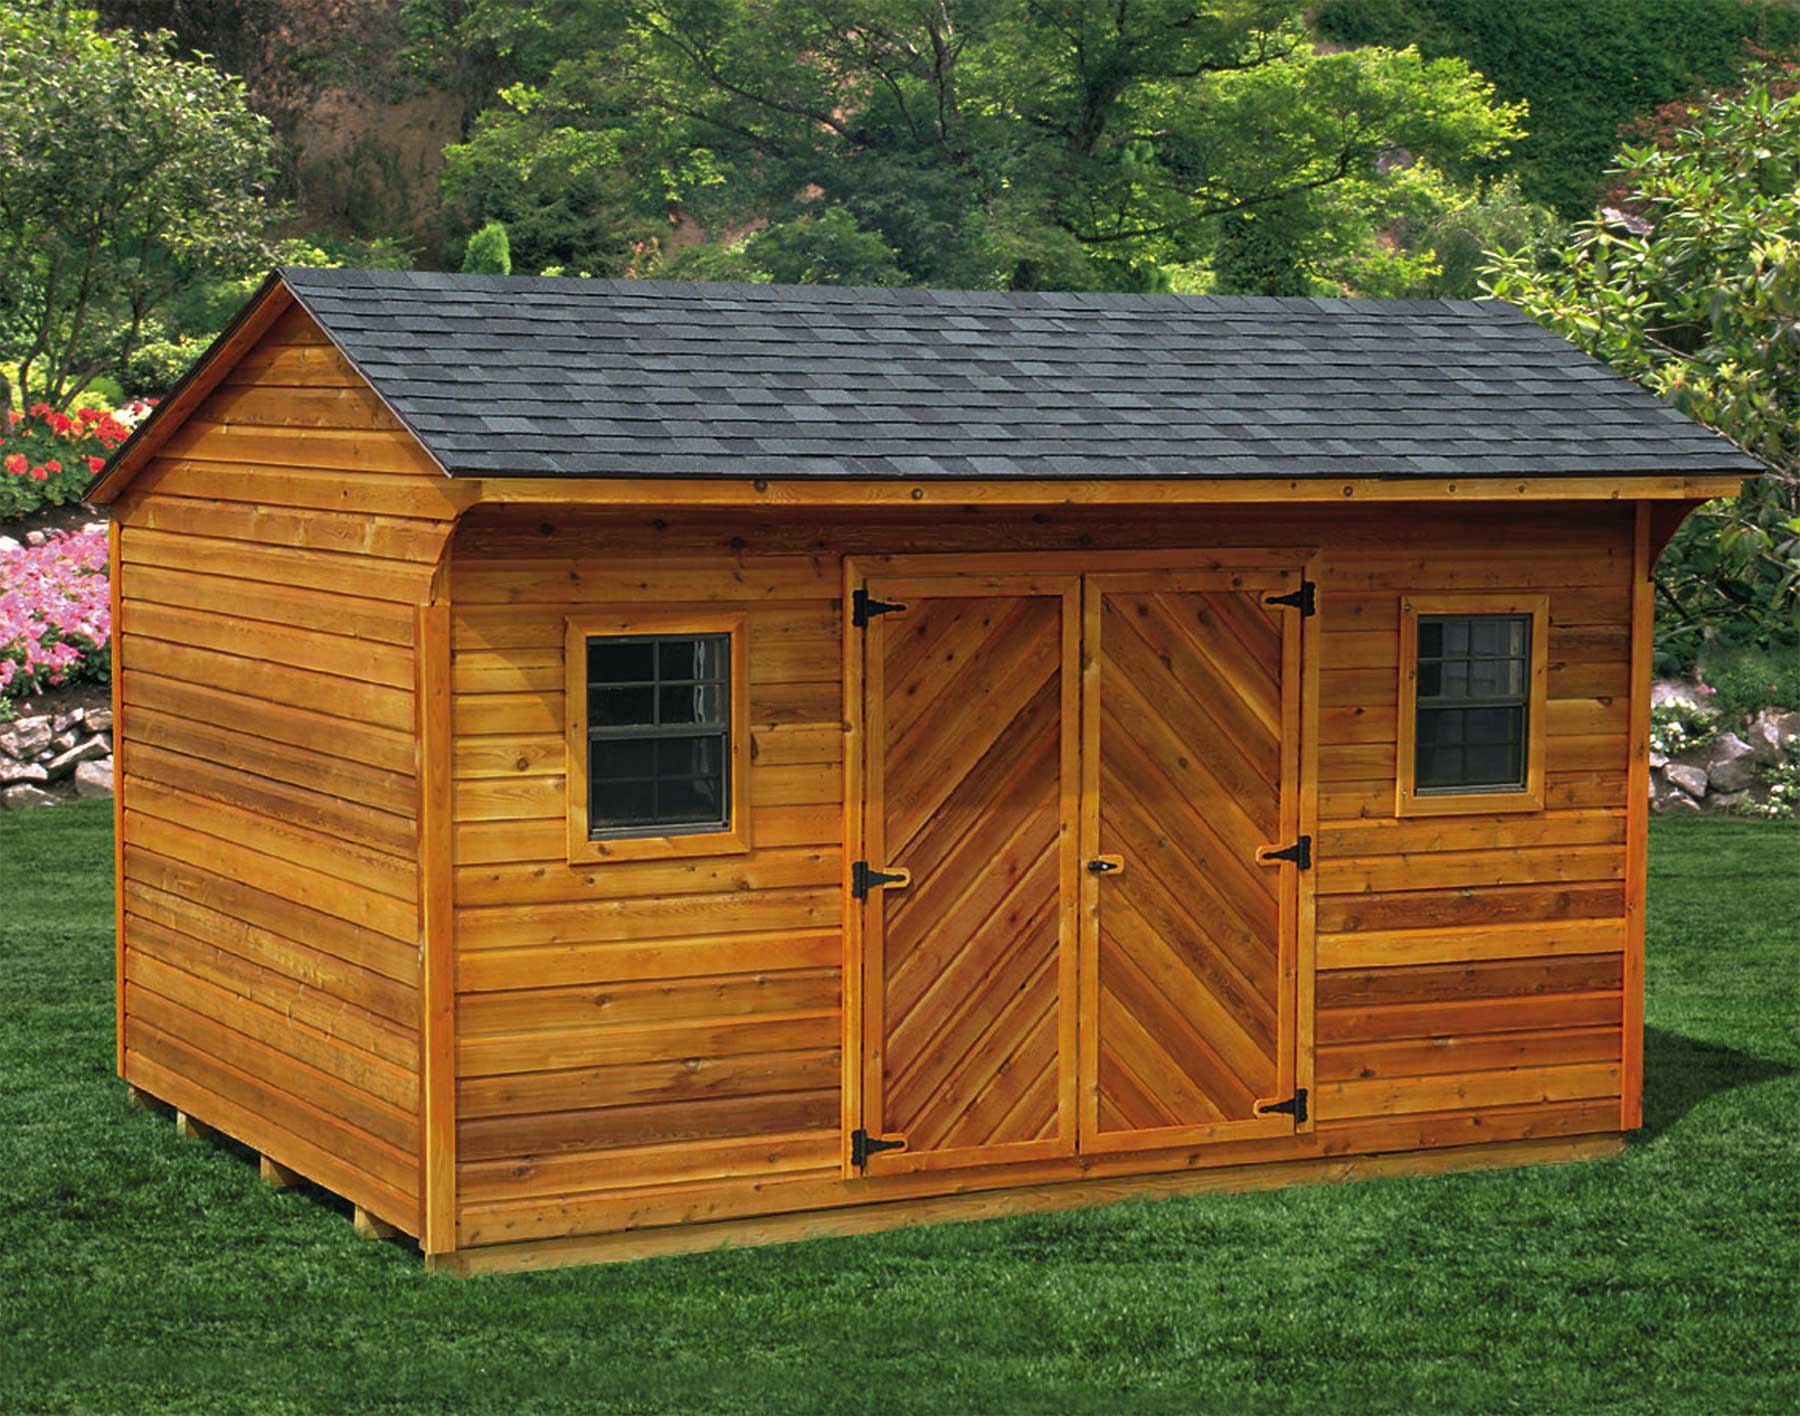  Woodworking Kits for My Wooden Backyard Sheds? | Cool Shed Design